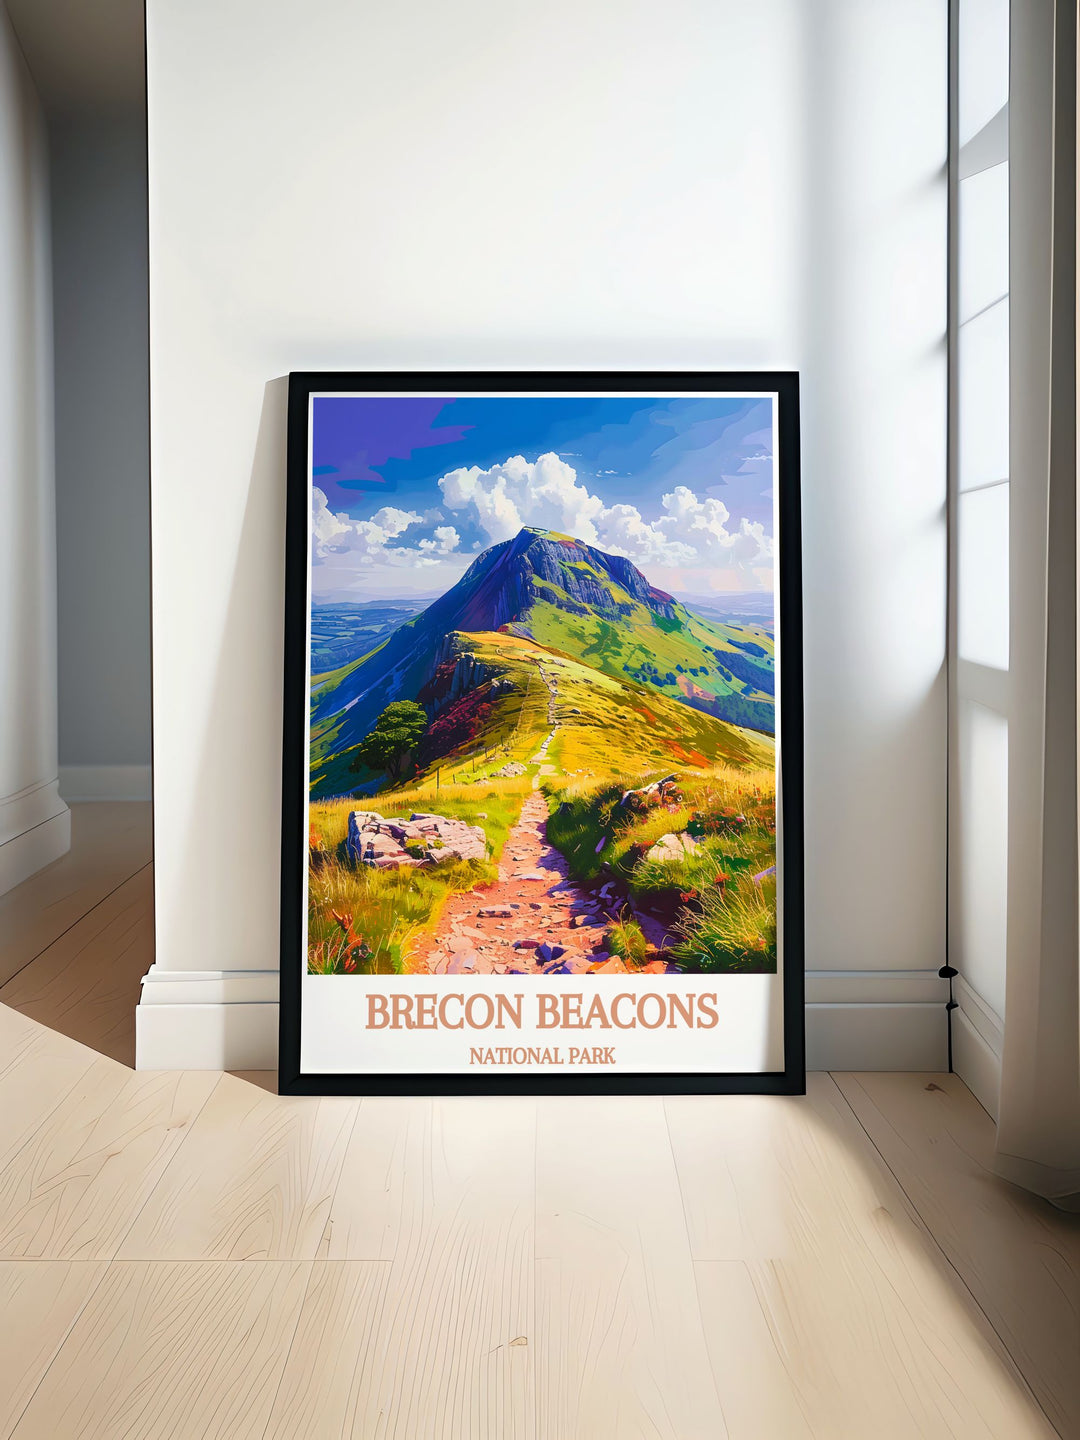 Exquisite gallery wall art of Pen Y Fan in the Brecon Beacons National Park, capturing the dynamic landscapes and natural grandeur of South Wales. This piece is ideal for adding a touch of the wild Welsh countryside to your home decor.